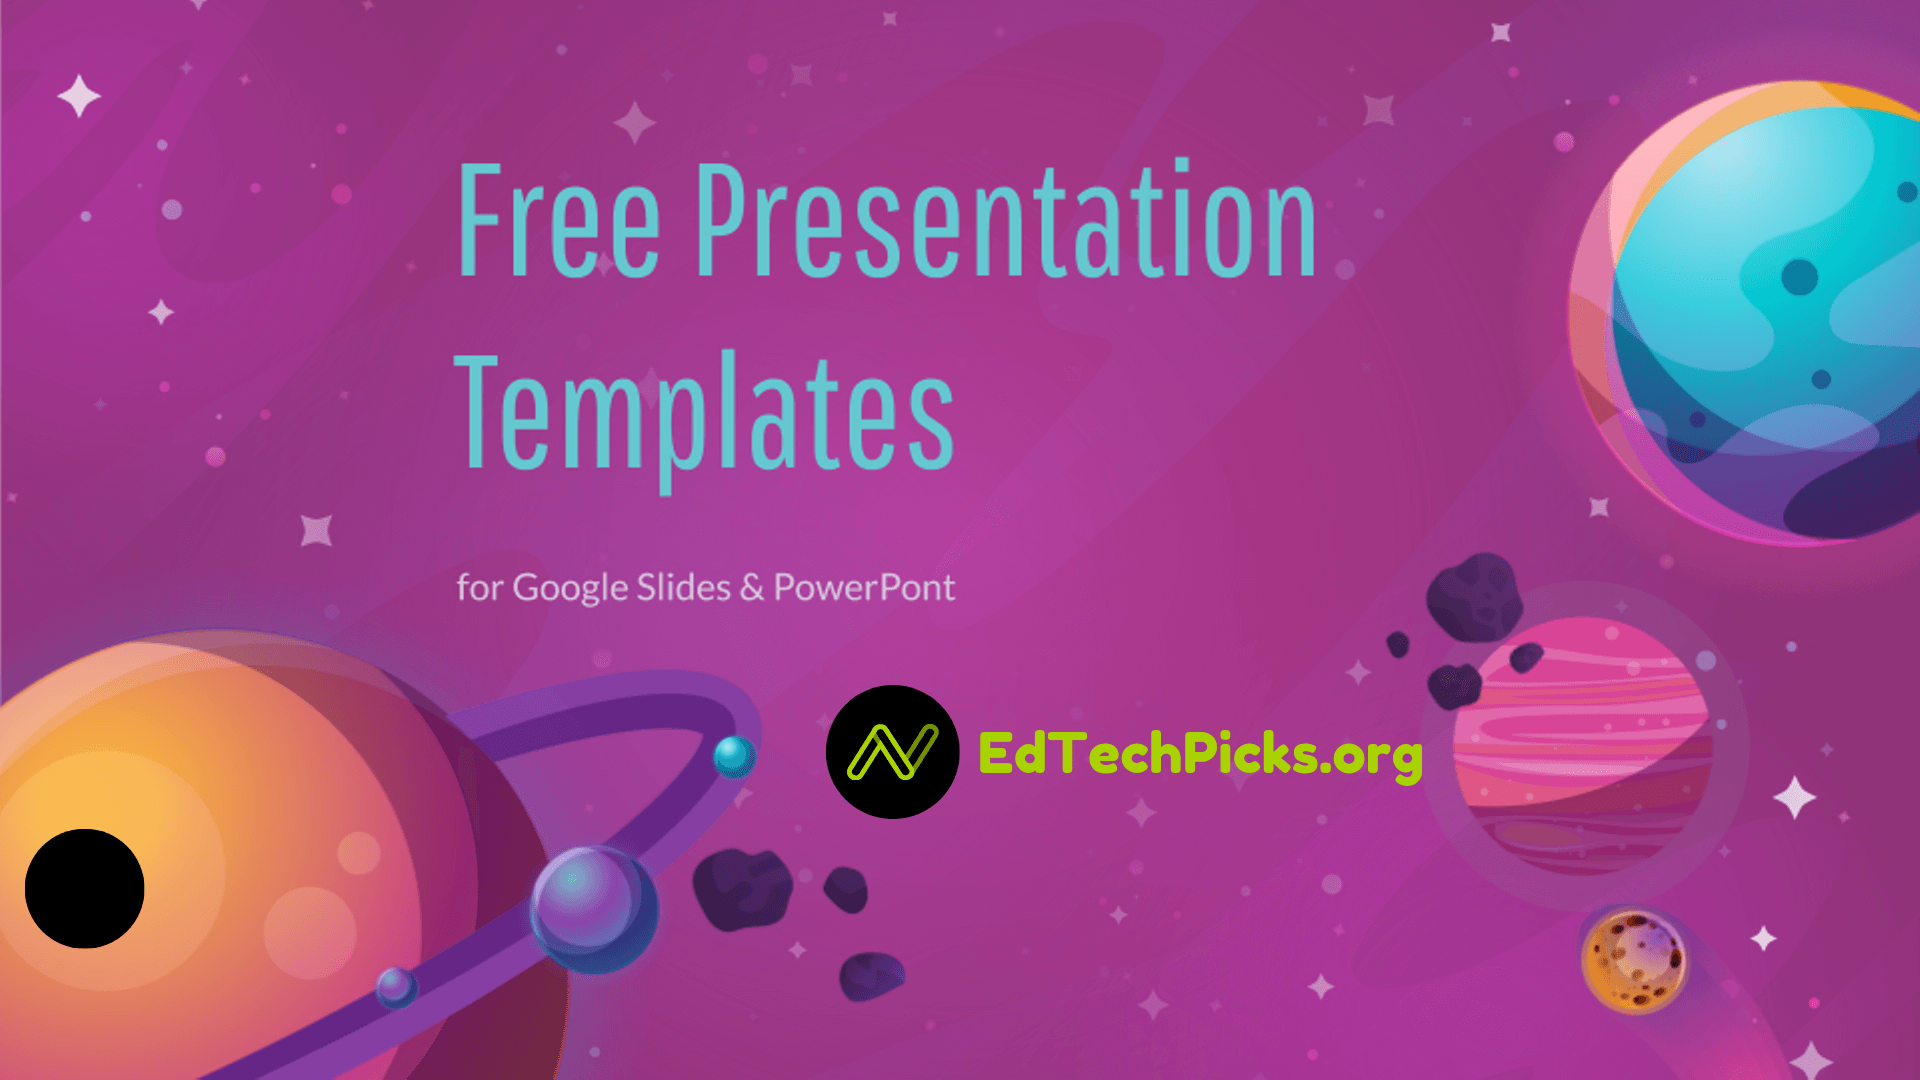 download-free-education-powerpoint-templates-for-slides-google-slides